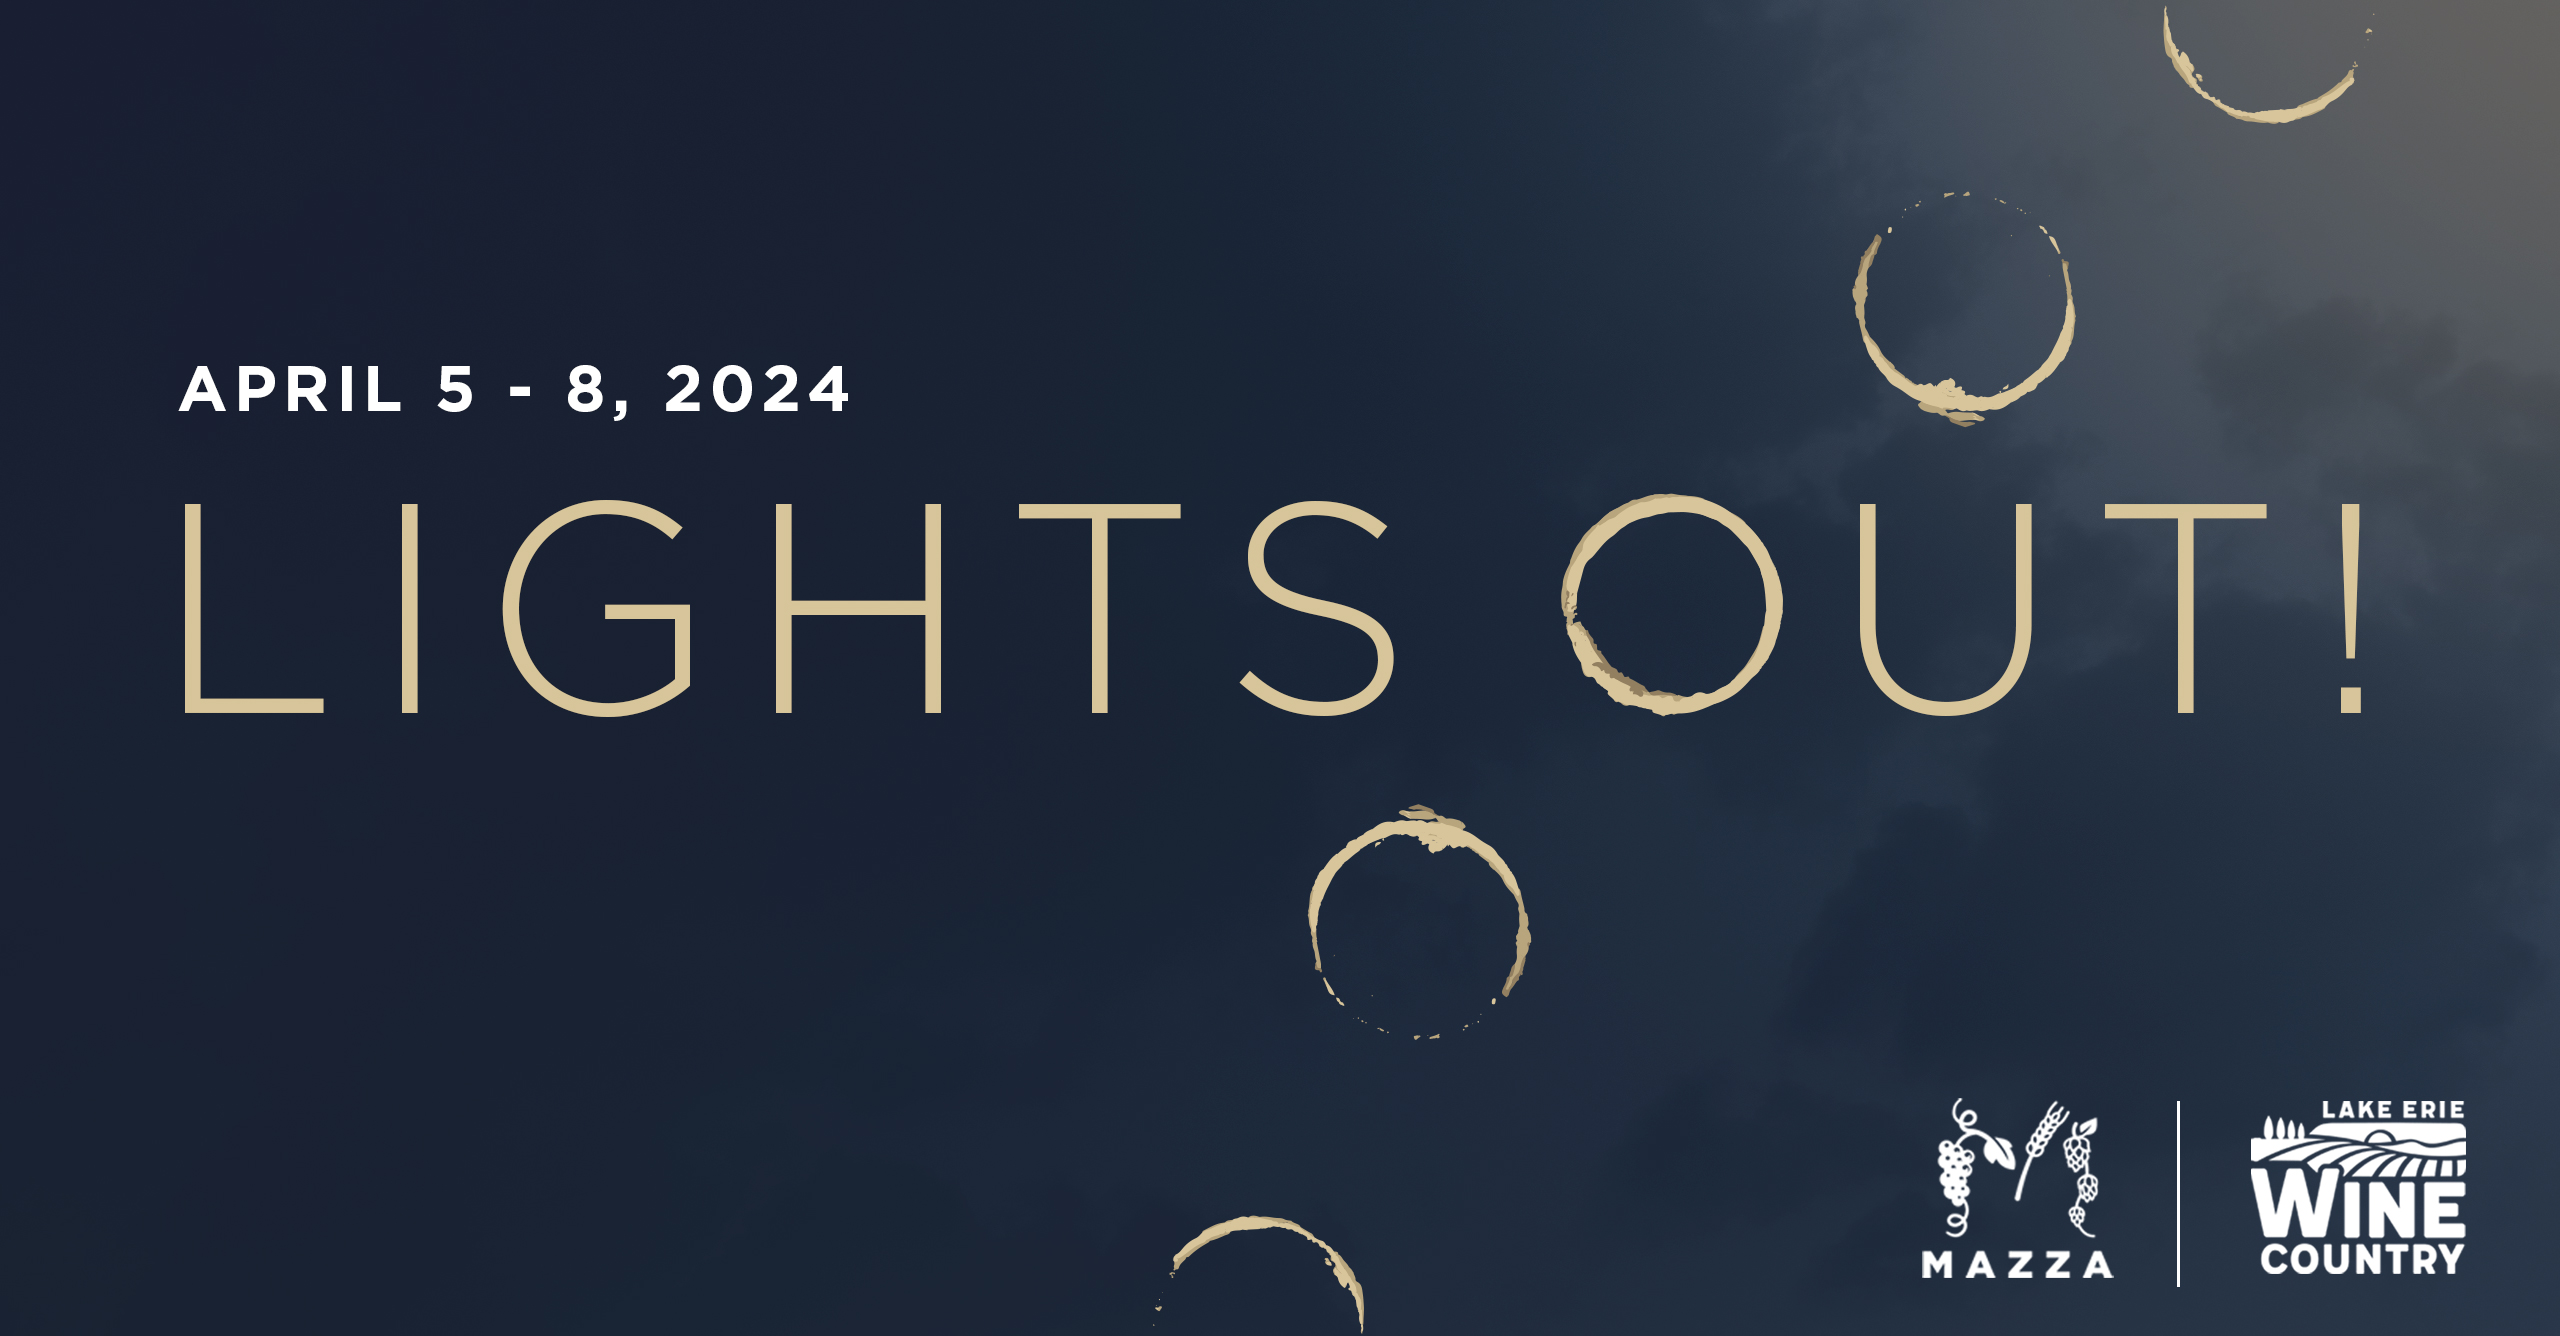 Lights Out! (Eclipse Weekend) With Mazza / Five & 20